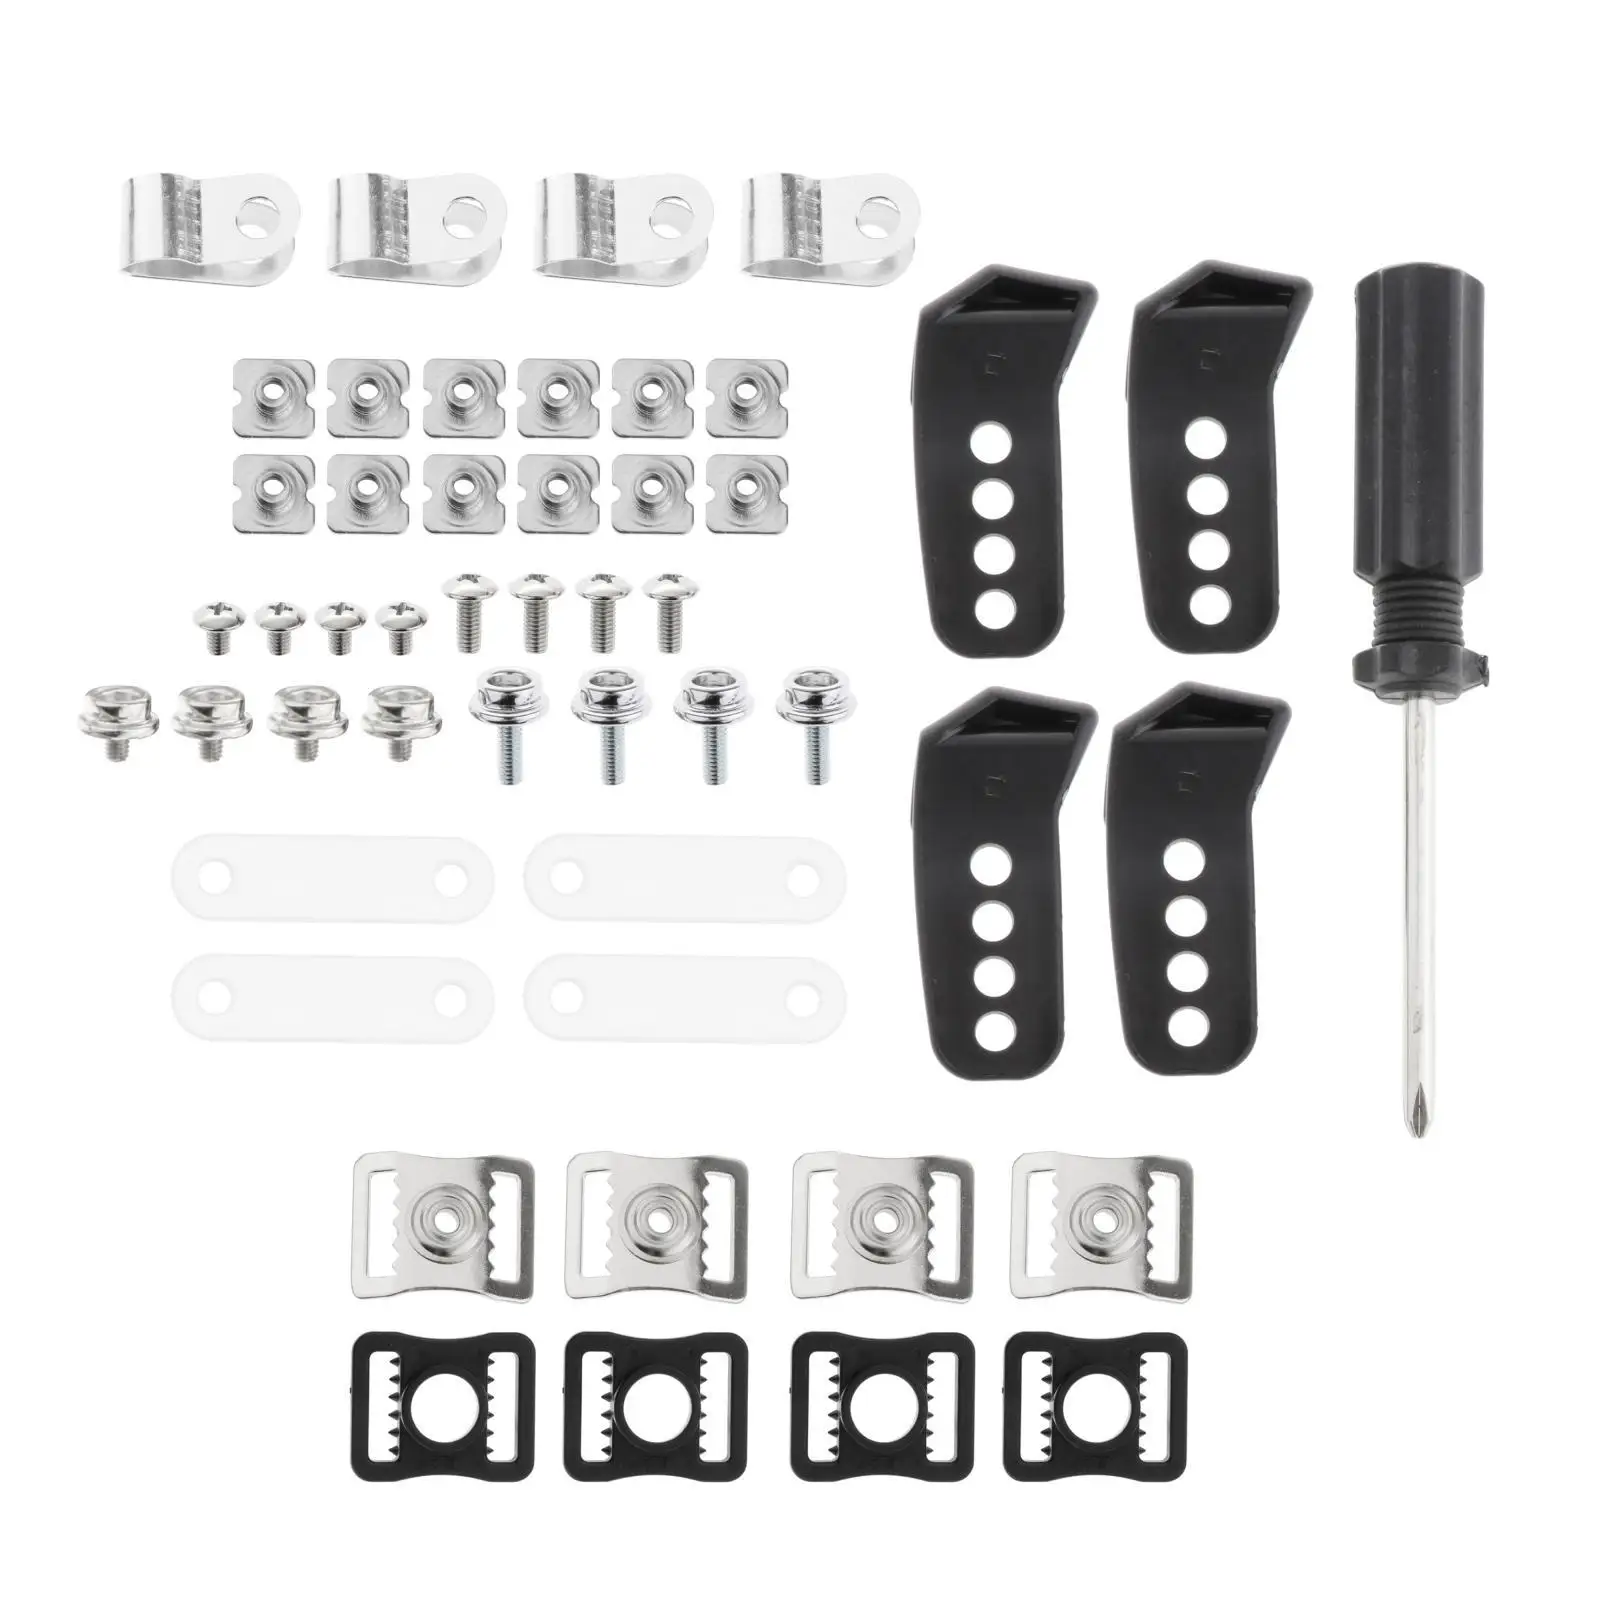 35 Pieces Football Helmet Repair Kit Nuts R Clips Replacement Rubber Gaskets Stainless Steel for Sports Youth Back up Hardwares